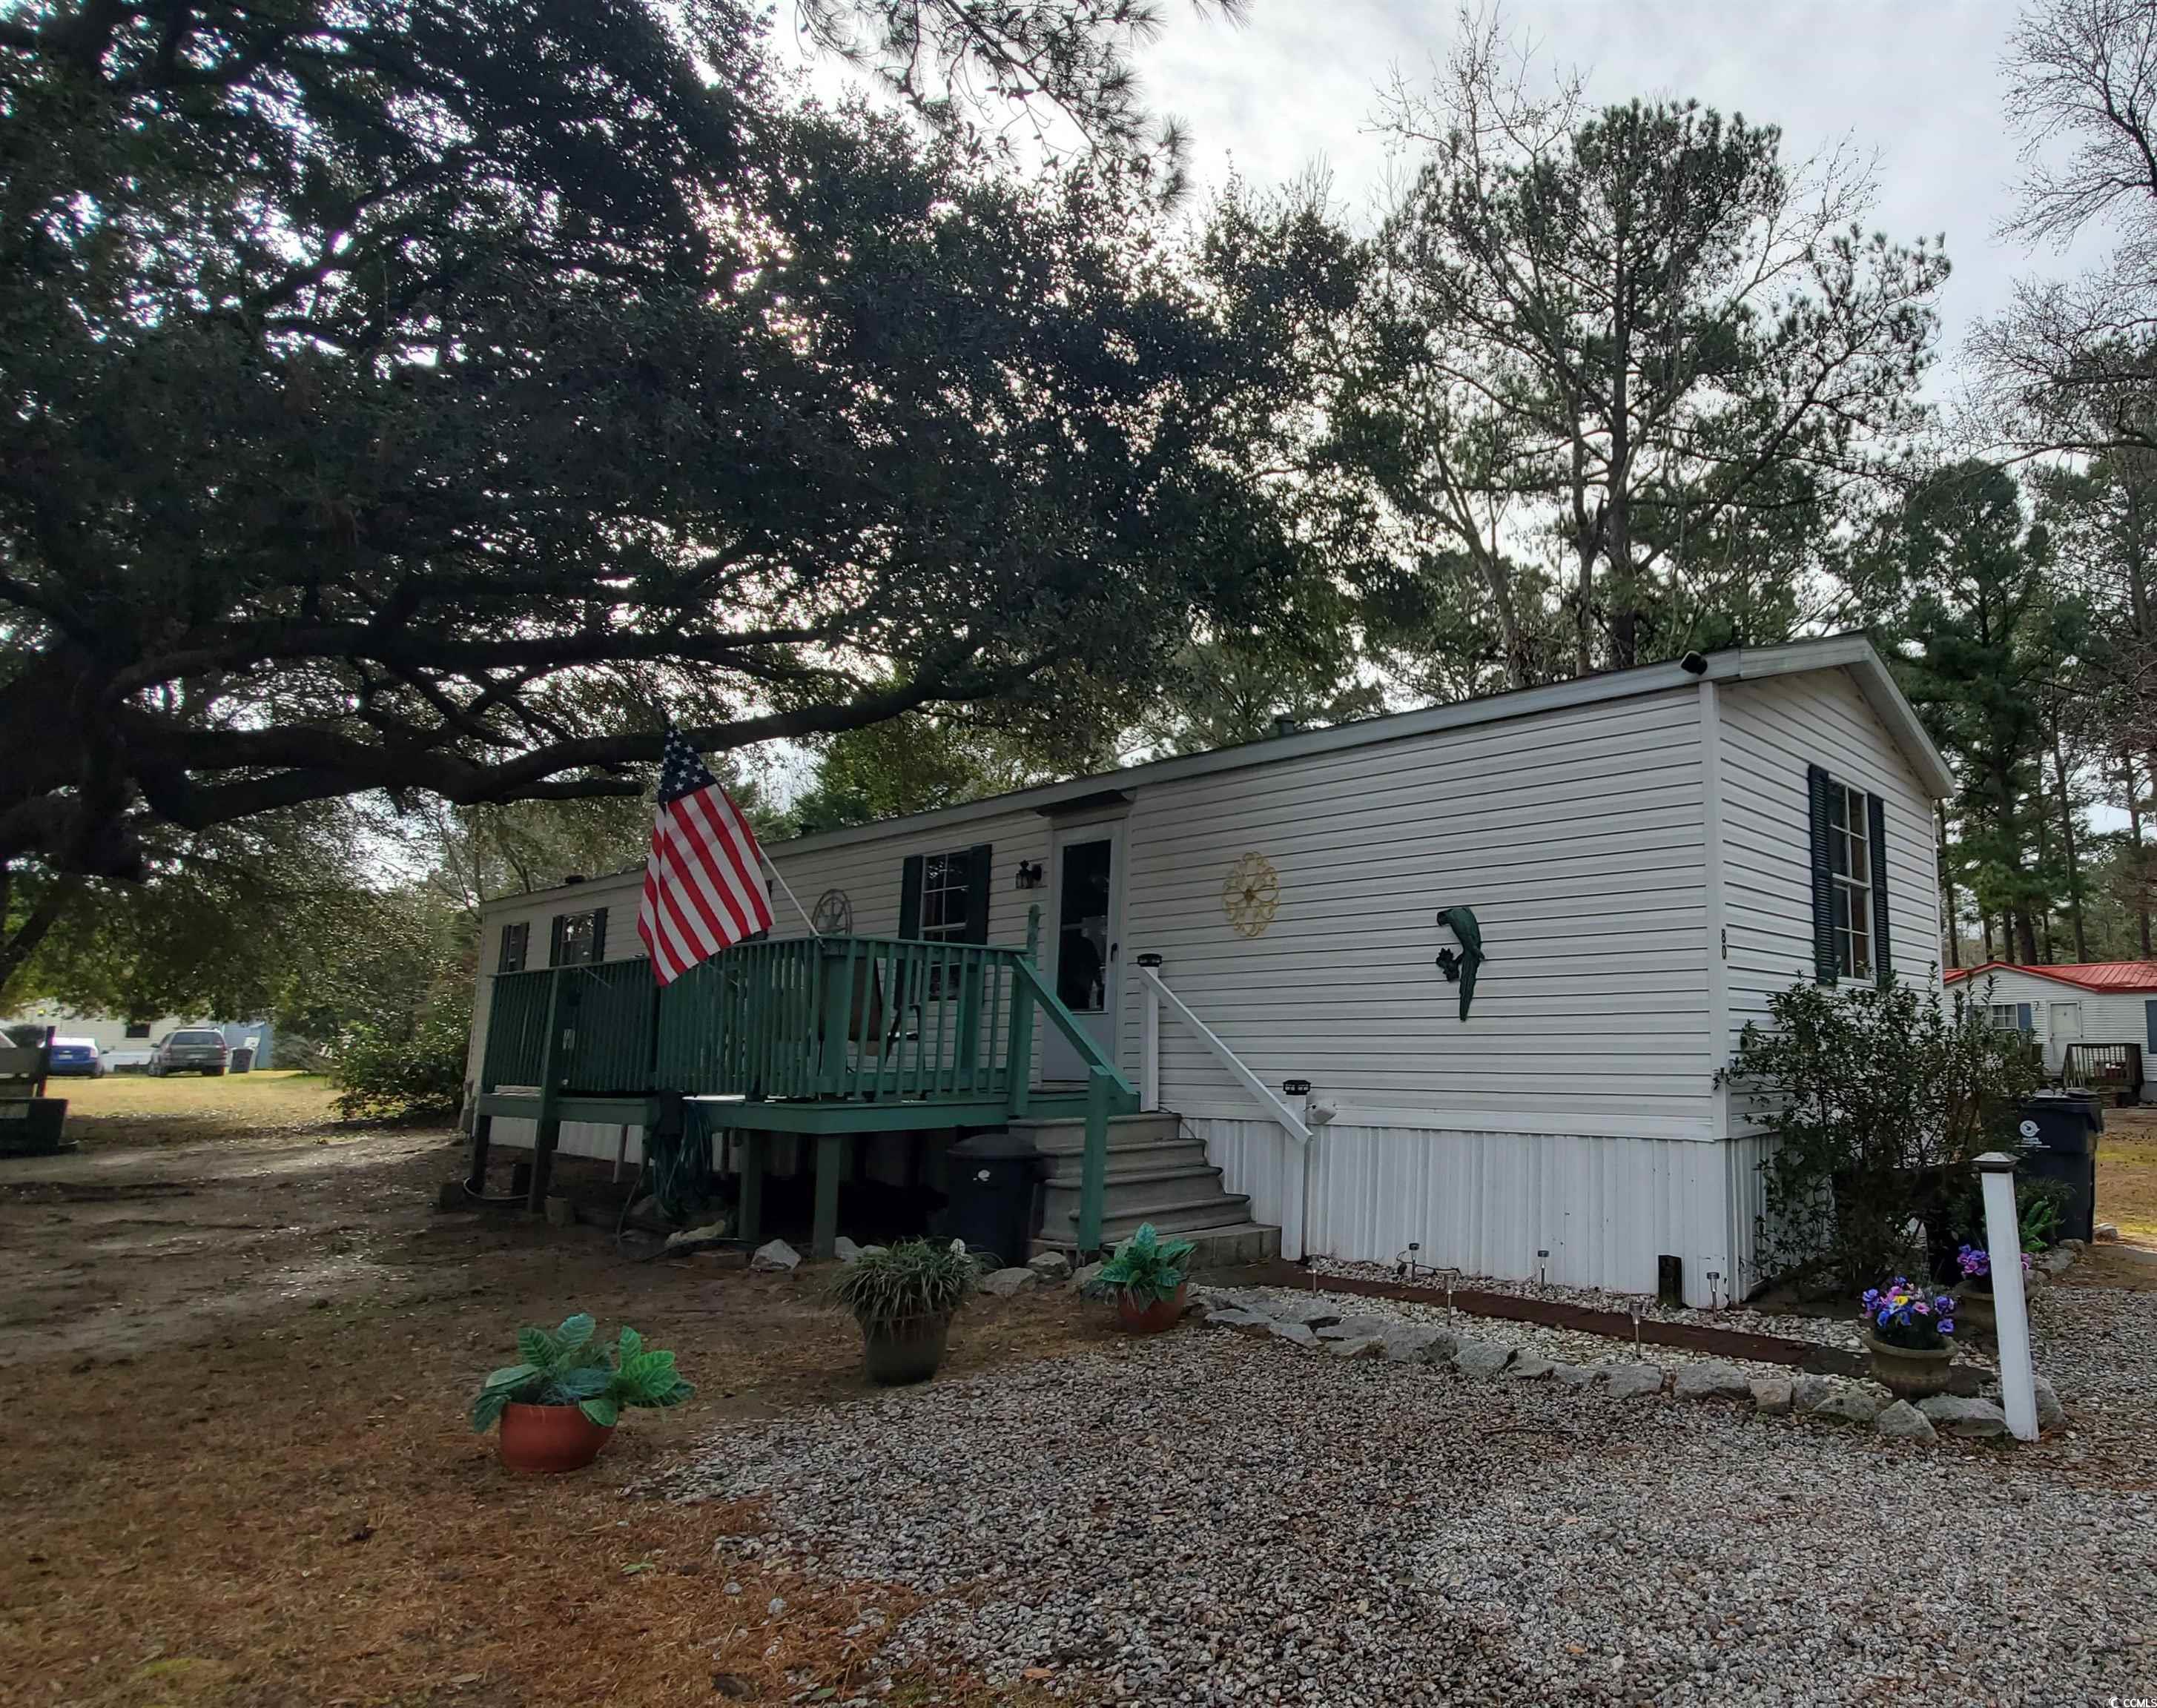 2 bedrooms, 2 baths manufactured home that has recently had a lot of improvements. new rheem heat pump 2020, all new front bathroom 2020. all new rear bathroom 2021.new rheem 40 gal water heater 2024. new sub-floor floating floor front bedroom 2024. rebuilt 8x20 deck in 2023 new paint. new rear stairs 2024 with new paint. 10x12 outside detached storage building. home is in very good condition, it has a large deck in front & an 10x12 outside storage bldg. it's in a small community with extra large lots. it's sitting on a big lot with lot's of old live oak trees, simply a beautiful private location. you'll have to see it to appreciate it's beauty. ginny hill mhp (a small family owned park), a 55 & up community located in murrells inlet, sc, approximately 15 minutes south of myrtle beach. near murrells inlet's famous marsh front restaurants and boardwalk, close to huntington beach (oceanfront) state park & beautiful brookgreen gardens. also near lots of golf courses & many other types of entertainment. only minutes from a modern hospital& doctors' o